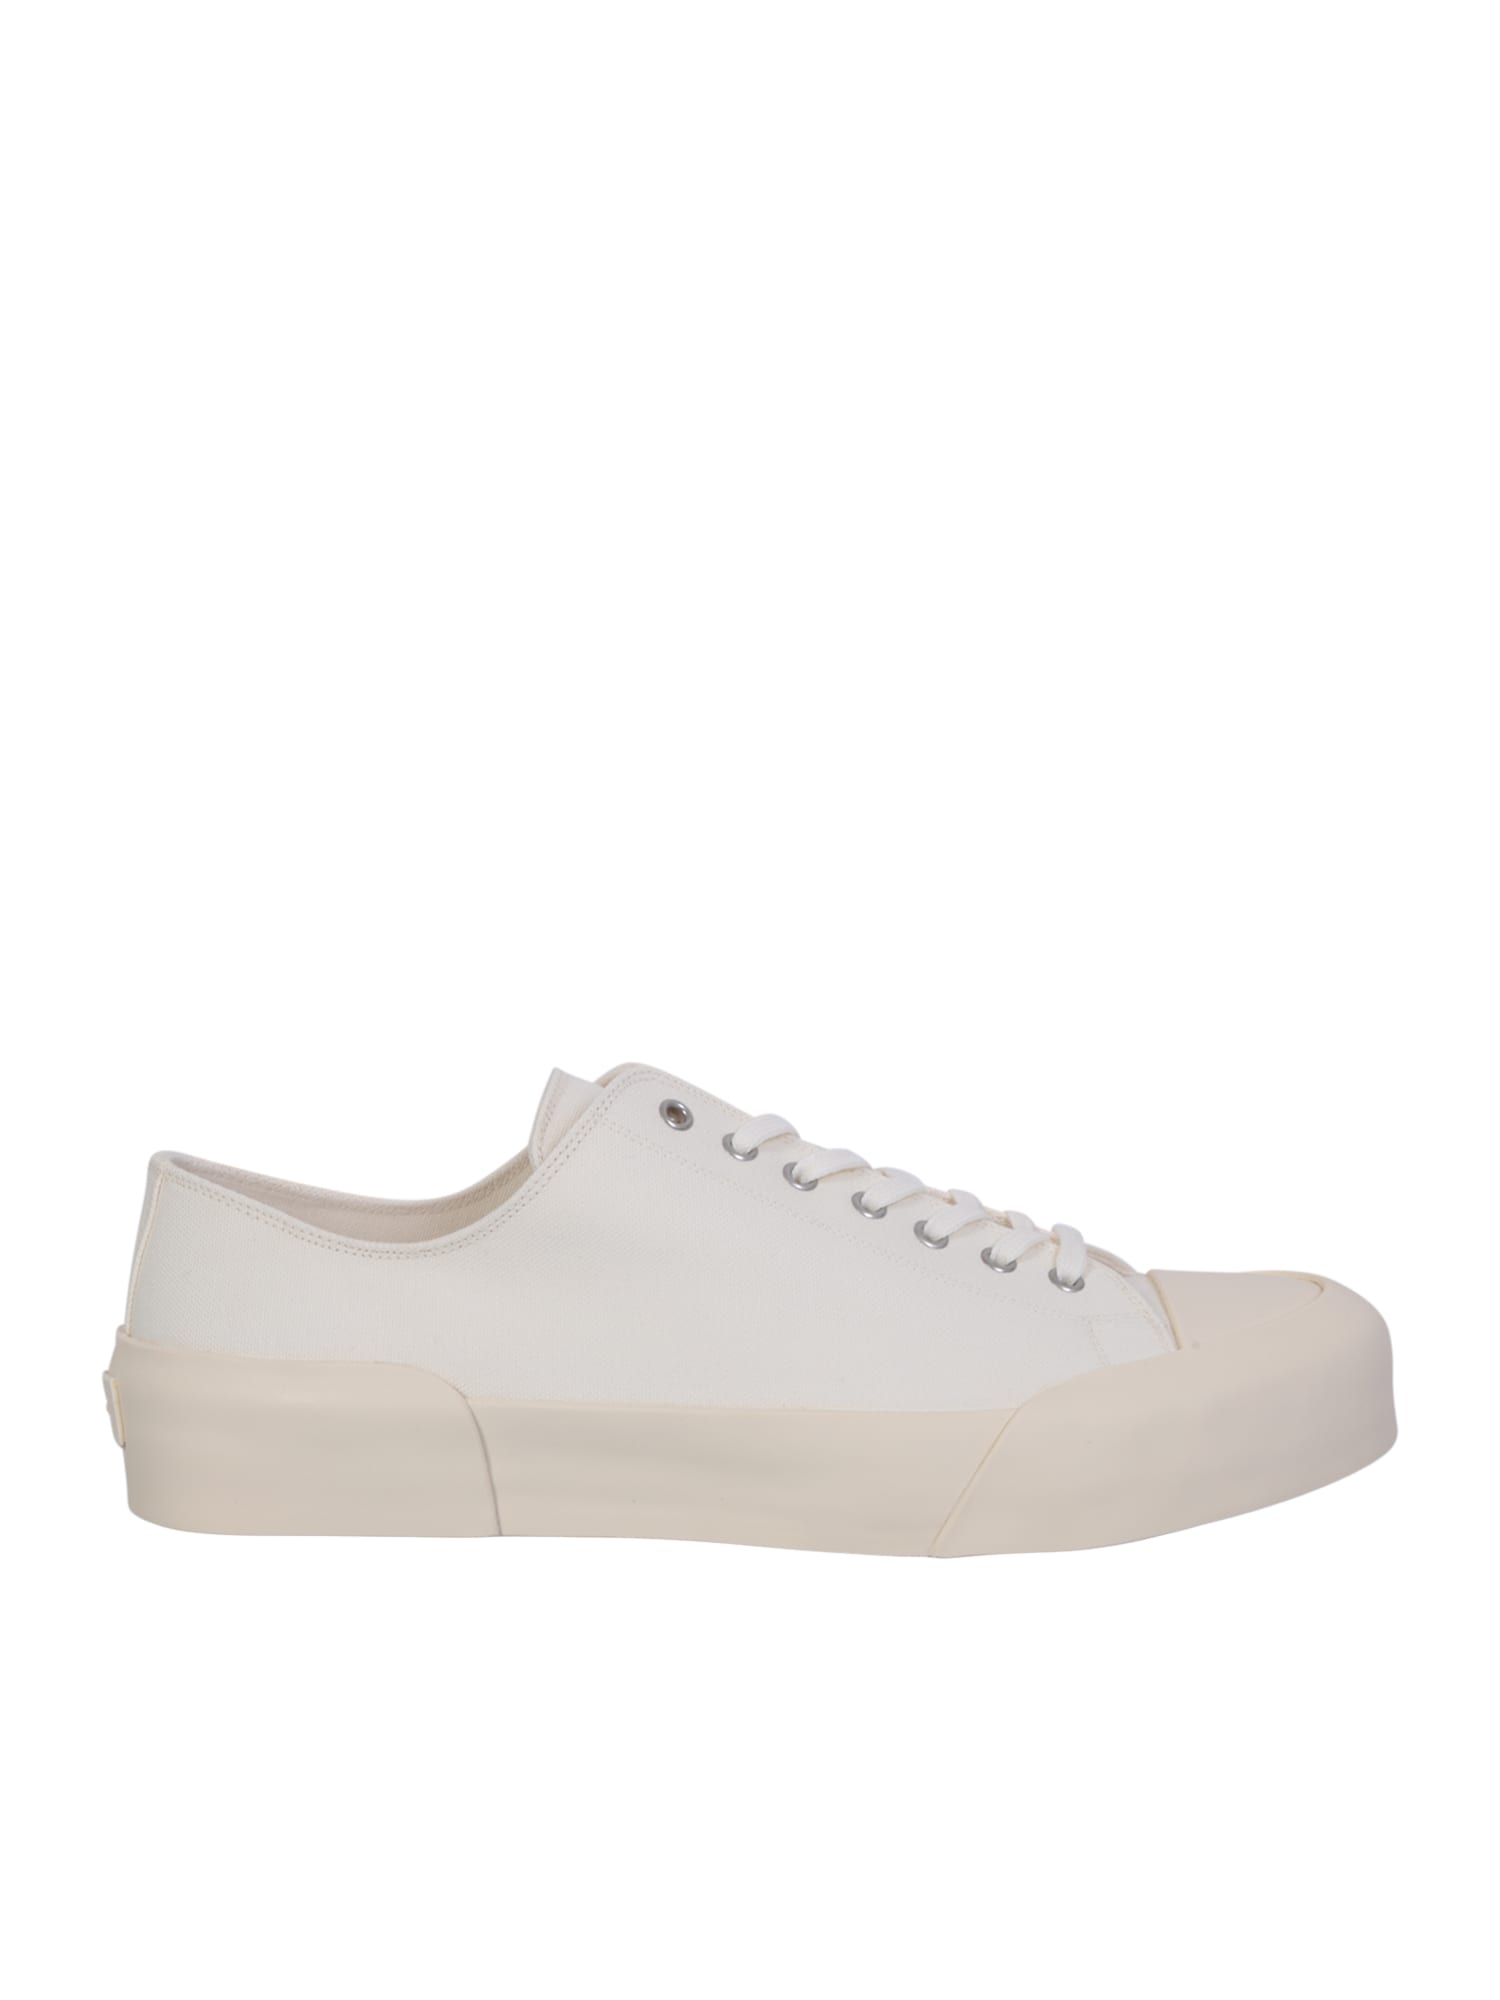 Jil Sander Lace-up Low White Trainers